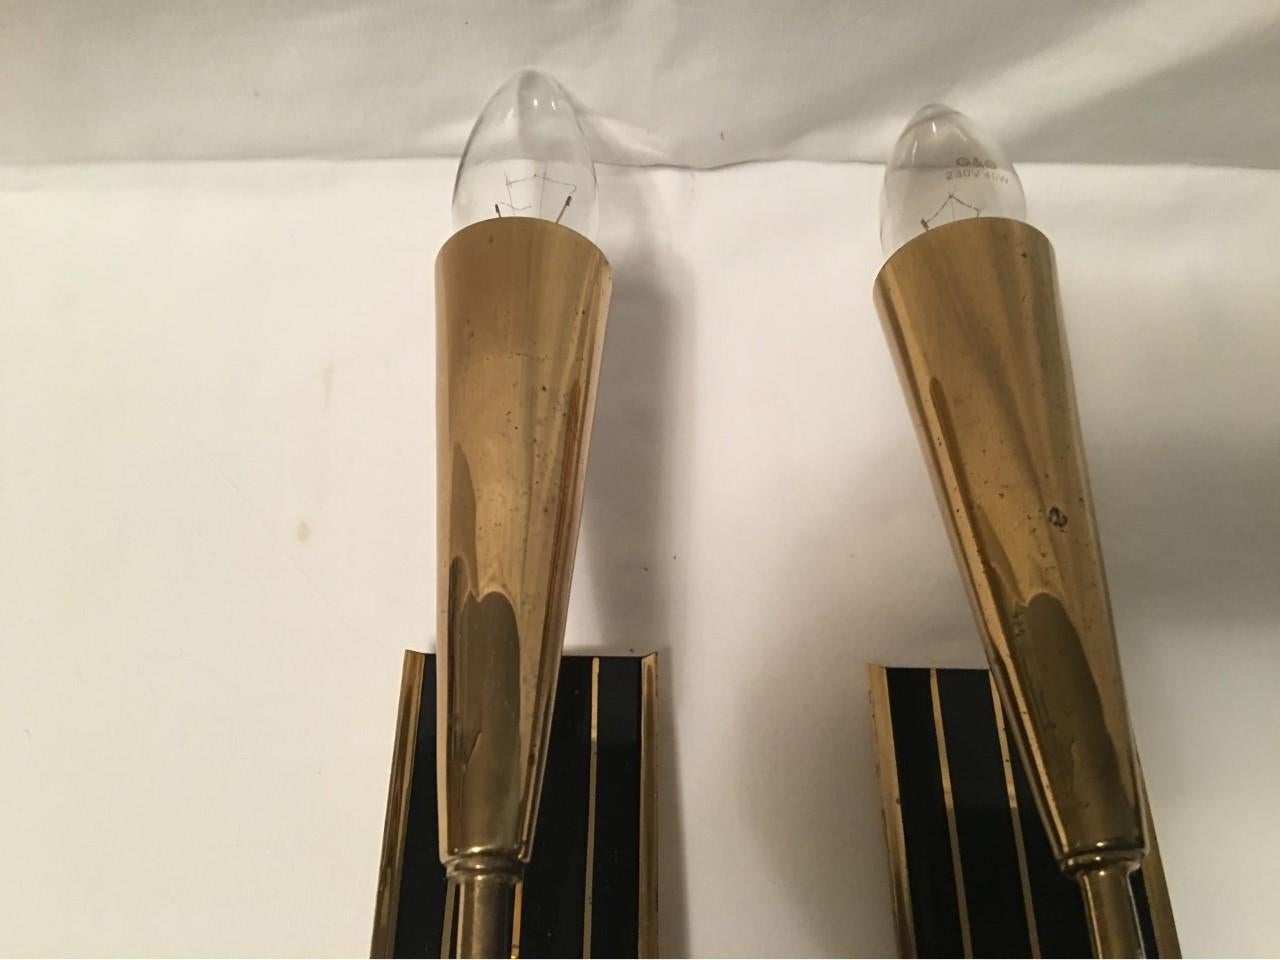 1950s Italian Brass Black Striped Sconces Very Art Deco Styling In Good Condition For Sale In Frisco, TX